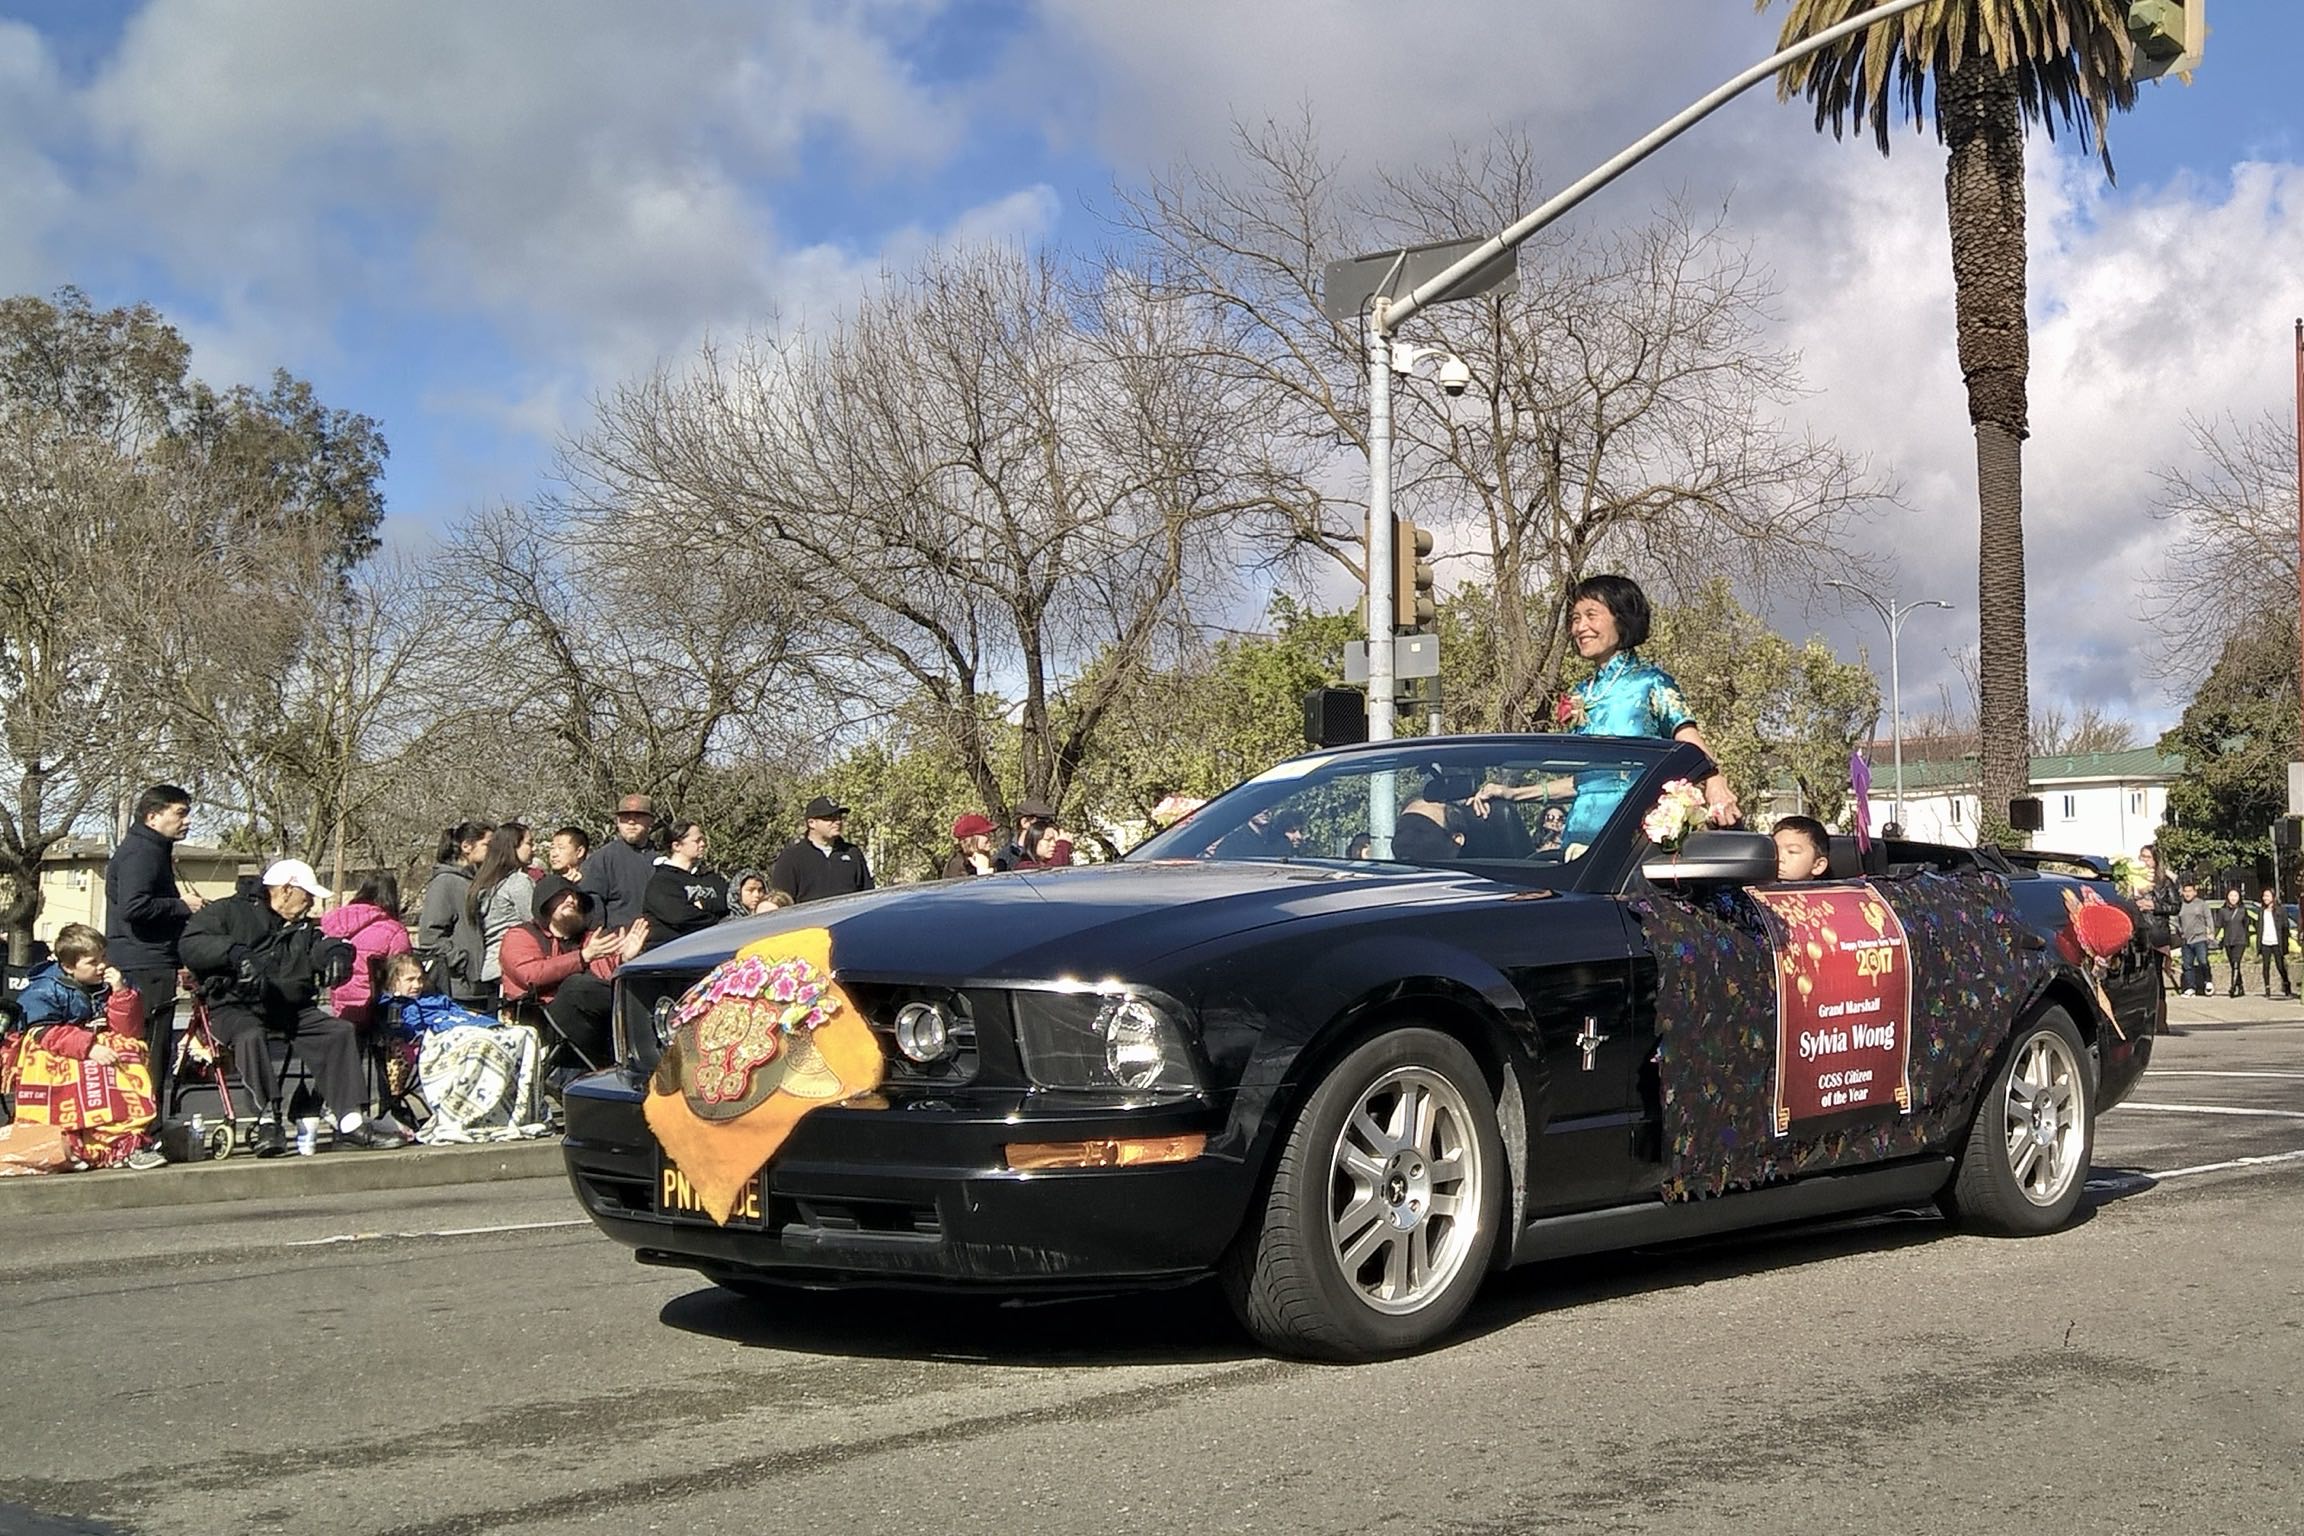 Sylvia Wong, the Grand Marshall of the Stockton Chinese New Year parade and CCSS Citizen of the Year, smiles as she stands inside a black Ford Mustang convertible.